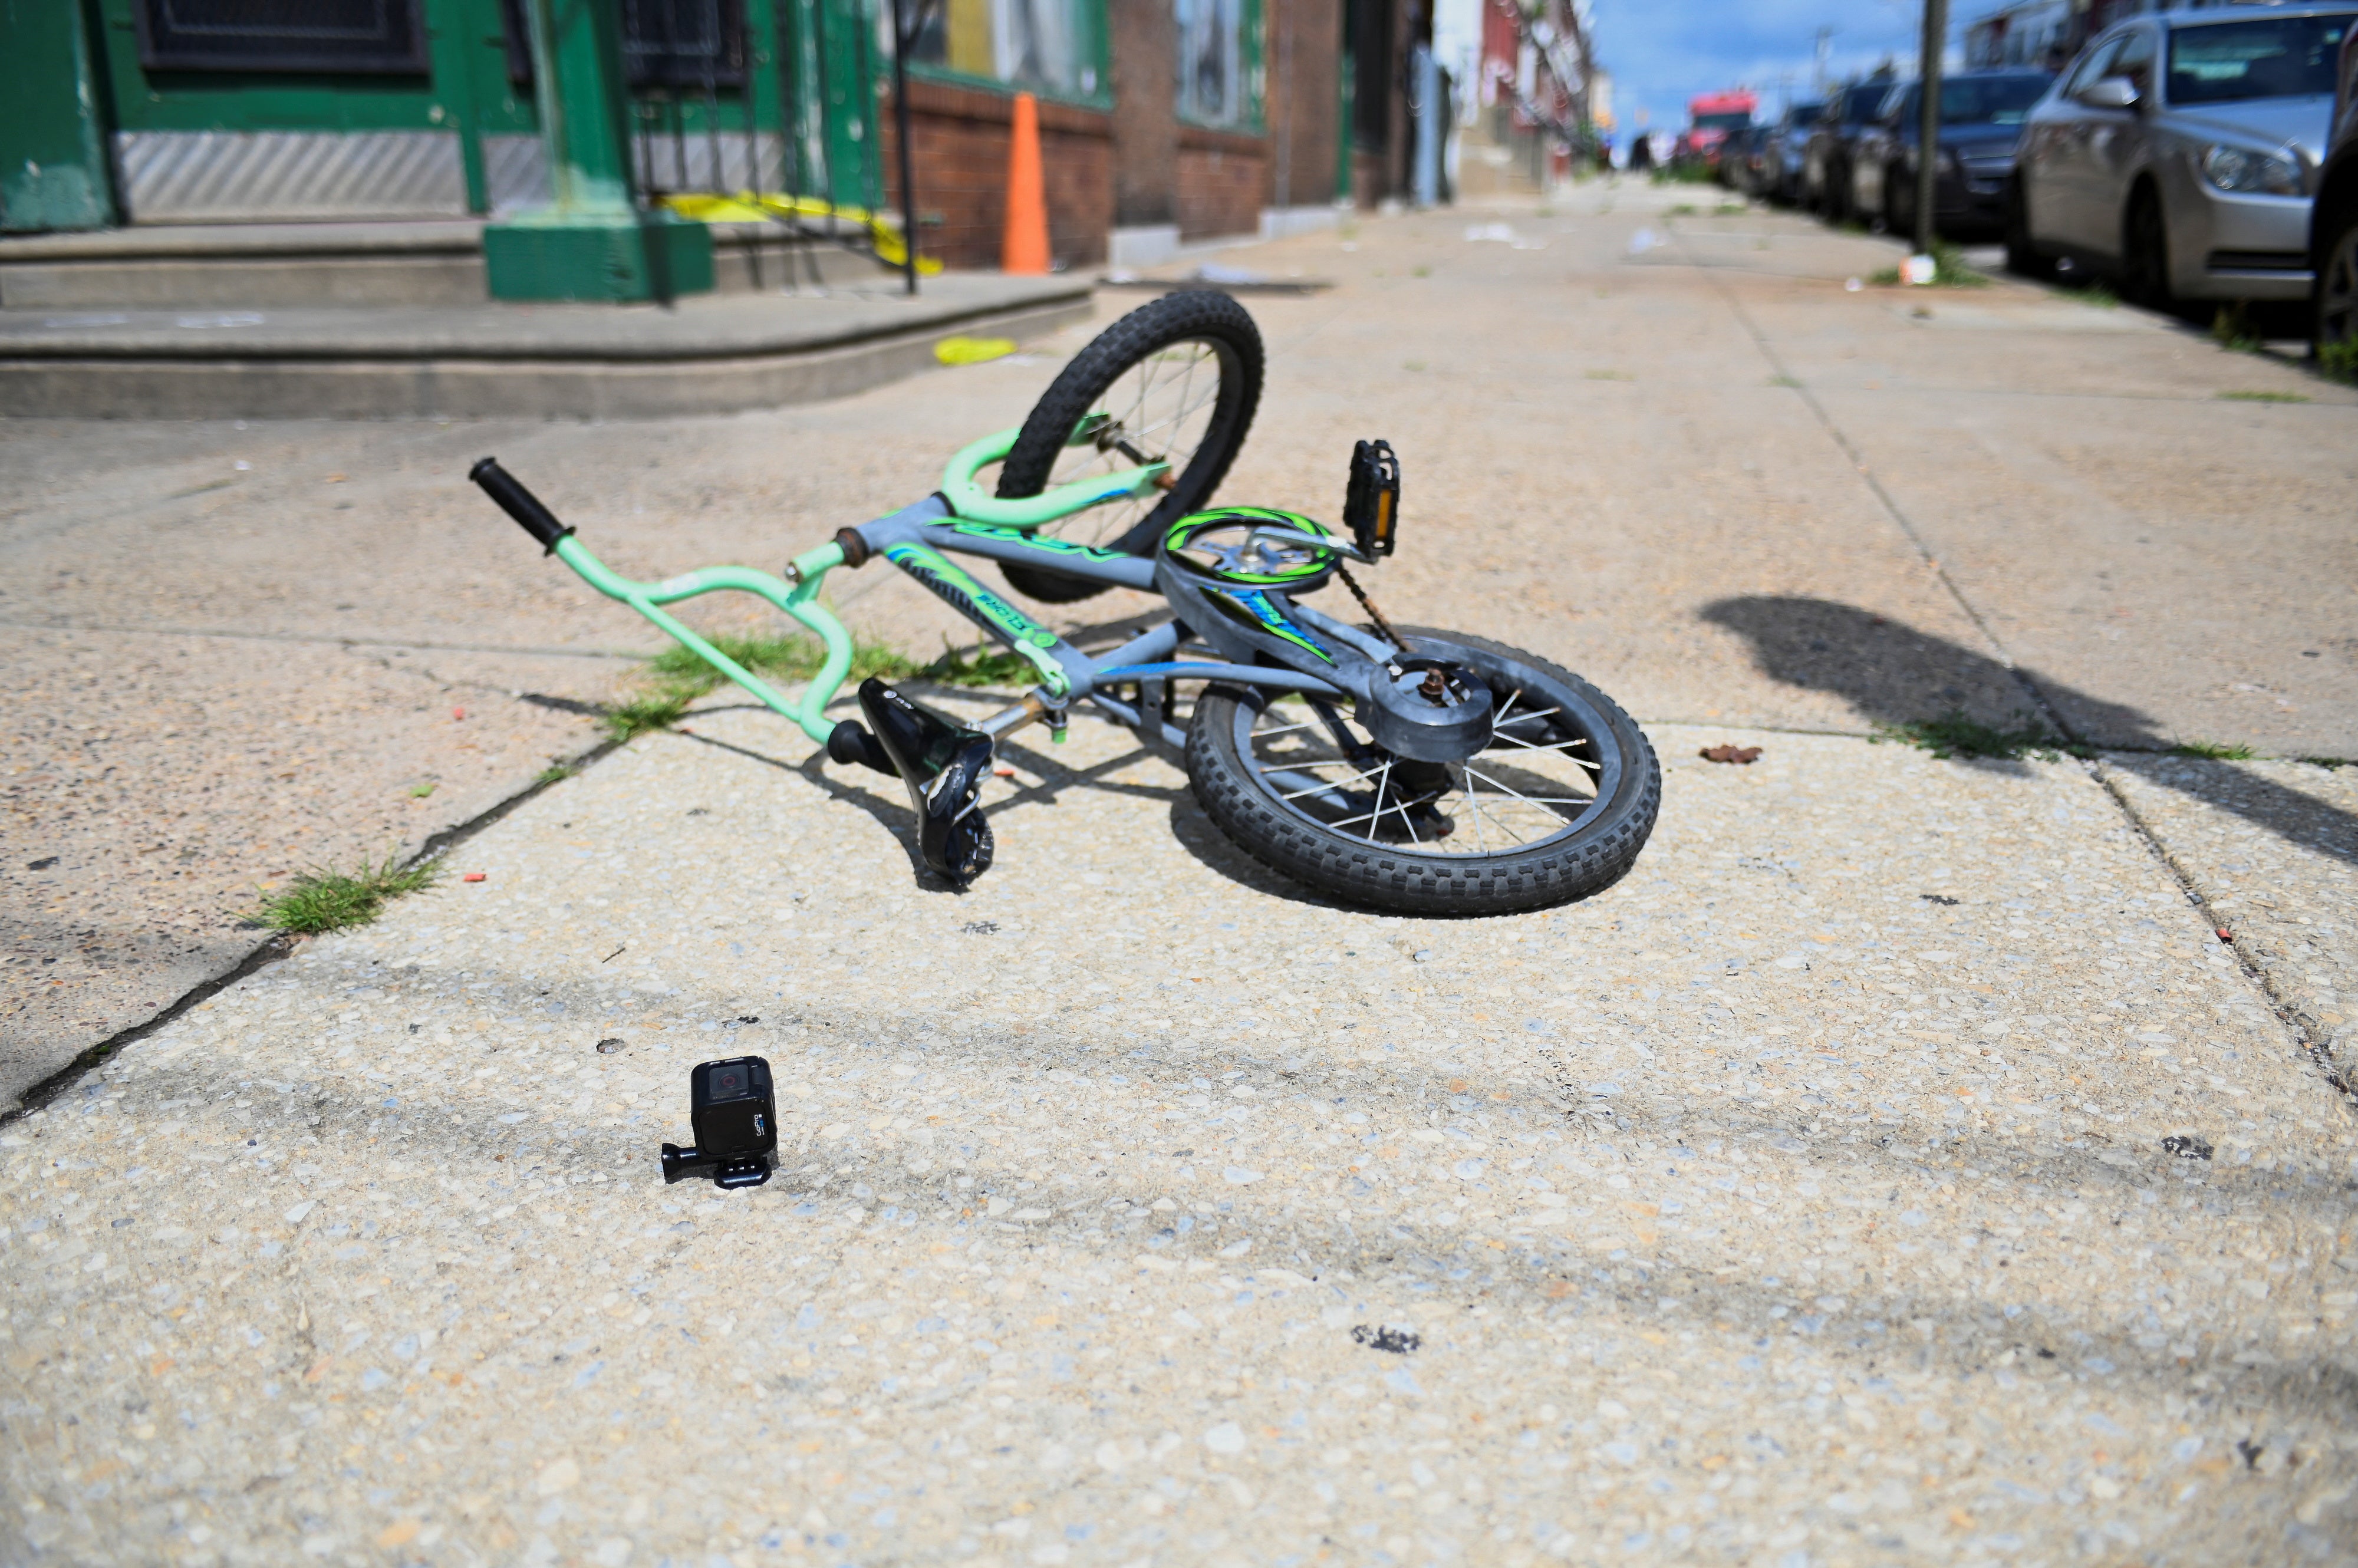 A bicycle is pictured at the scene as investigations are ongoing the day after a mass shooting in the Kingsessing section of southwest Philadelphia, Pennsylvania